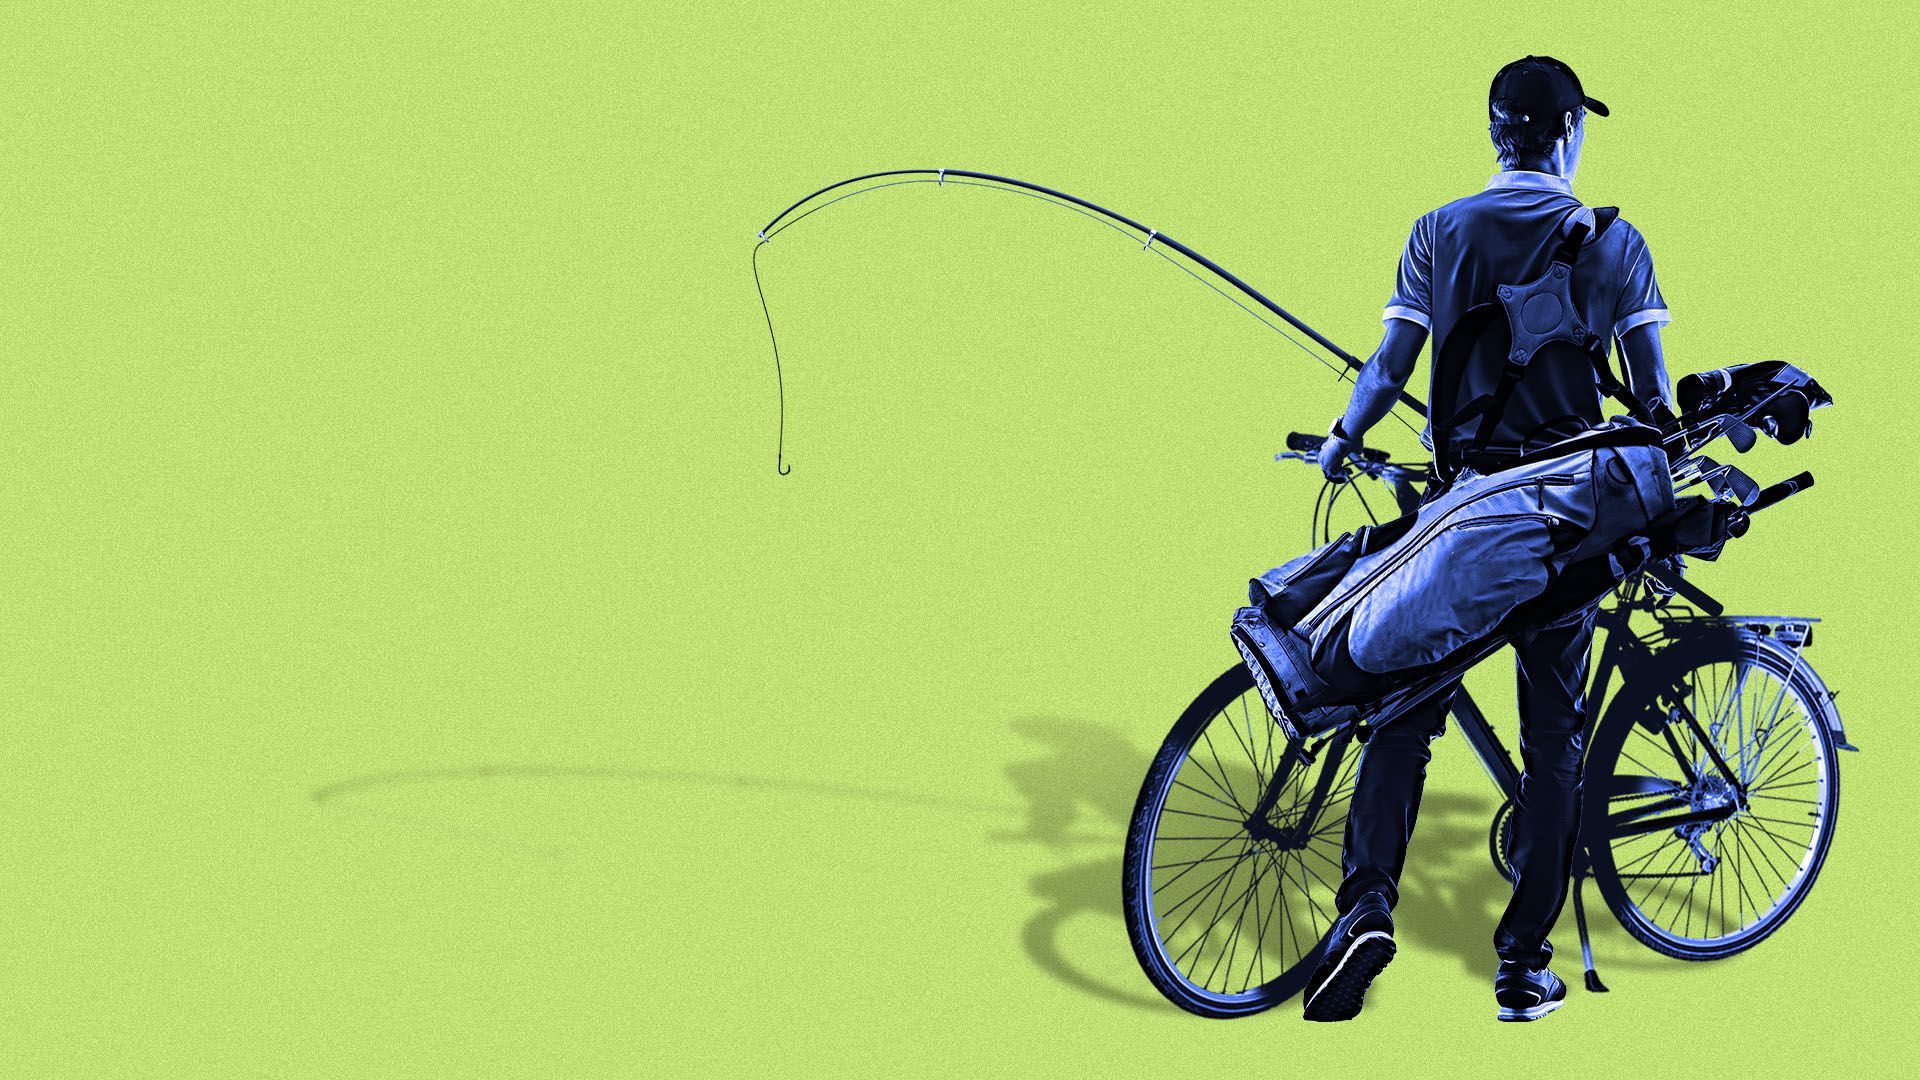 Illustration of a man with a golf bag, fishing rod, and bicycle